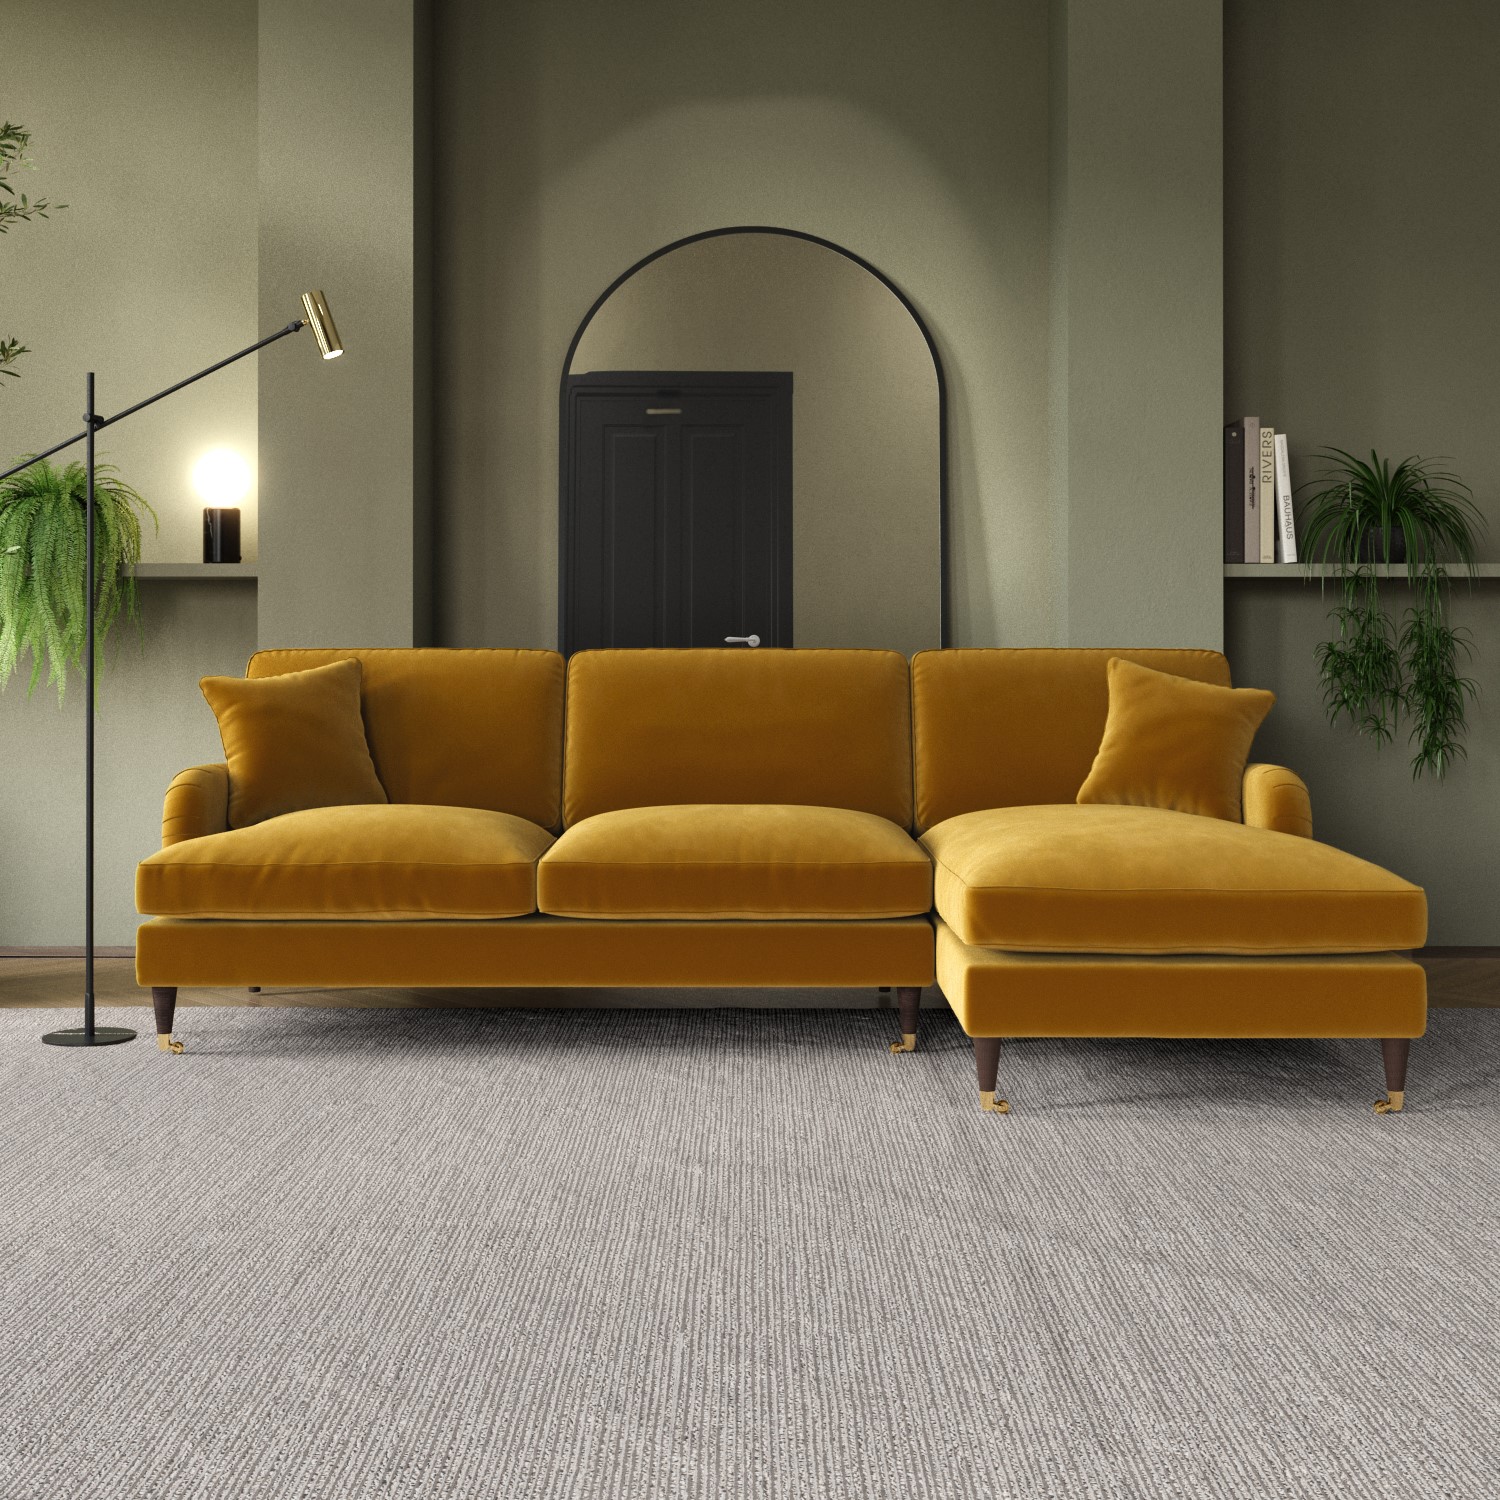 Read more about Mustard velvet right hand facing l shaped sofa seats 4 payton